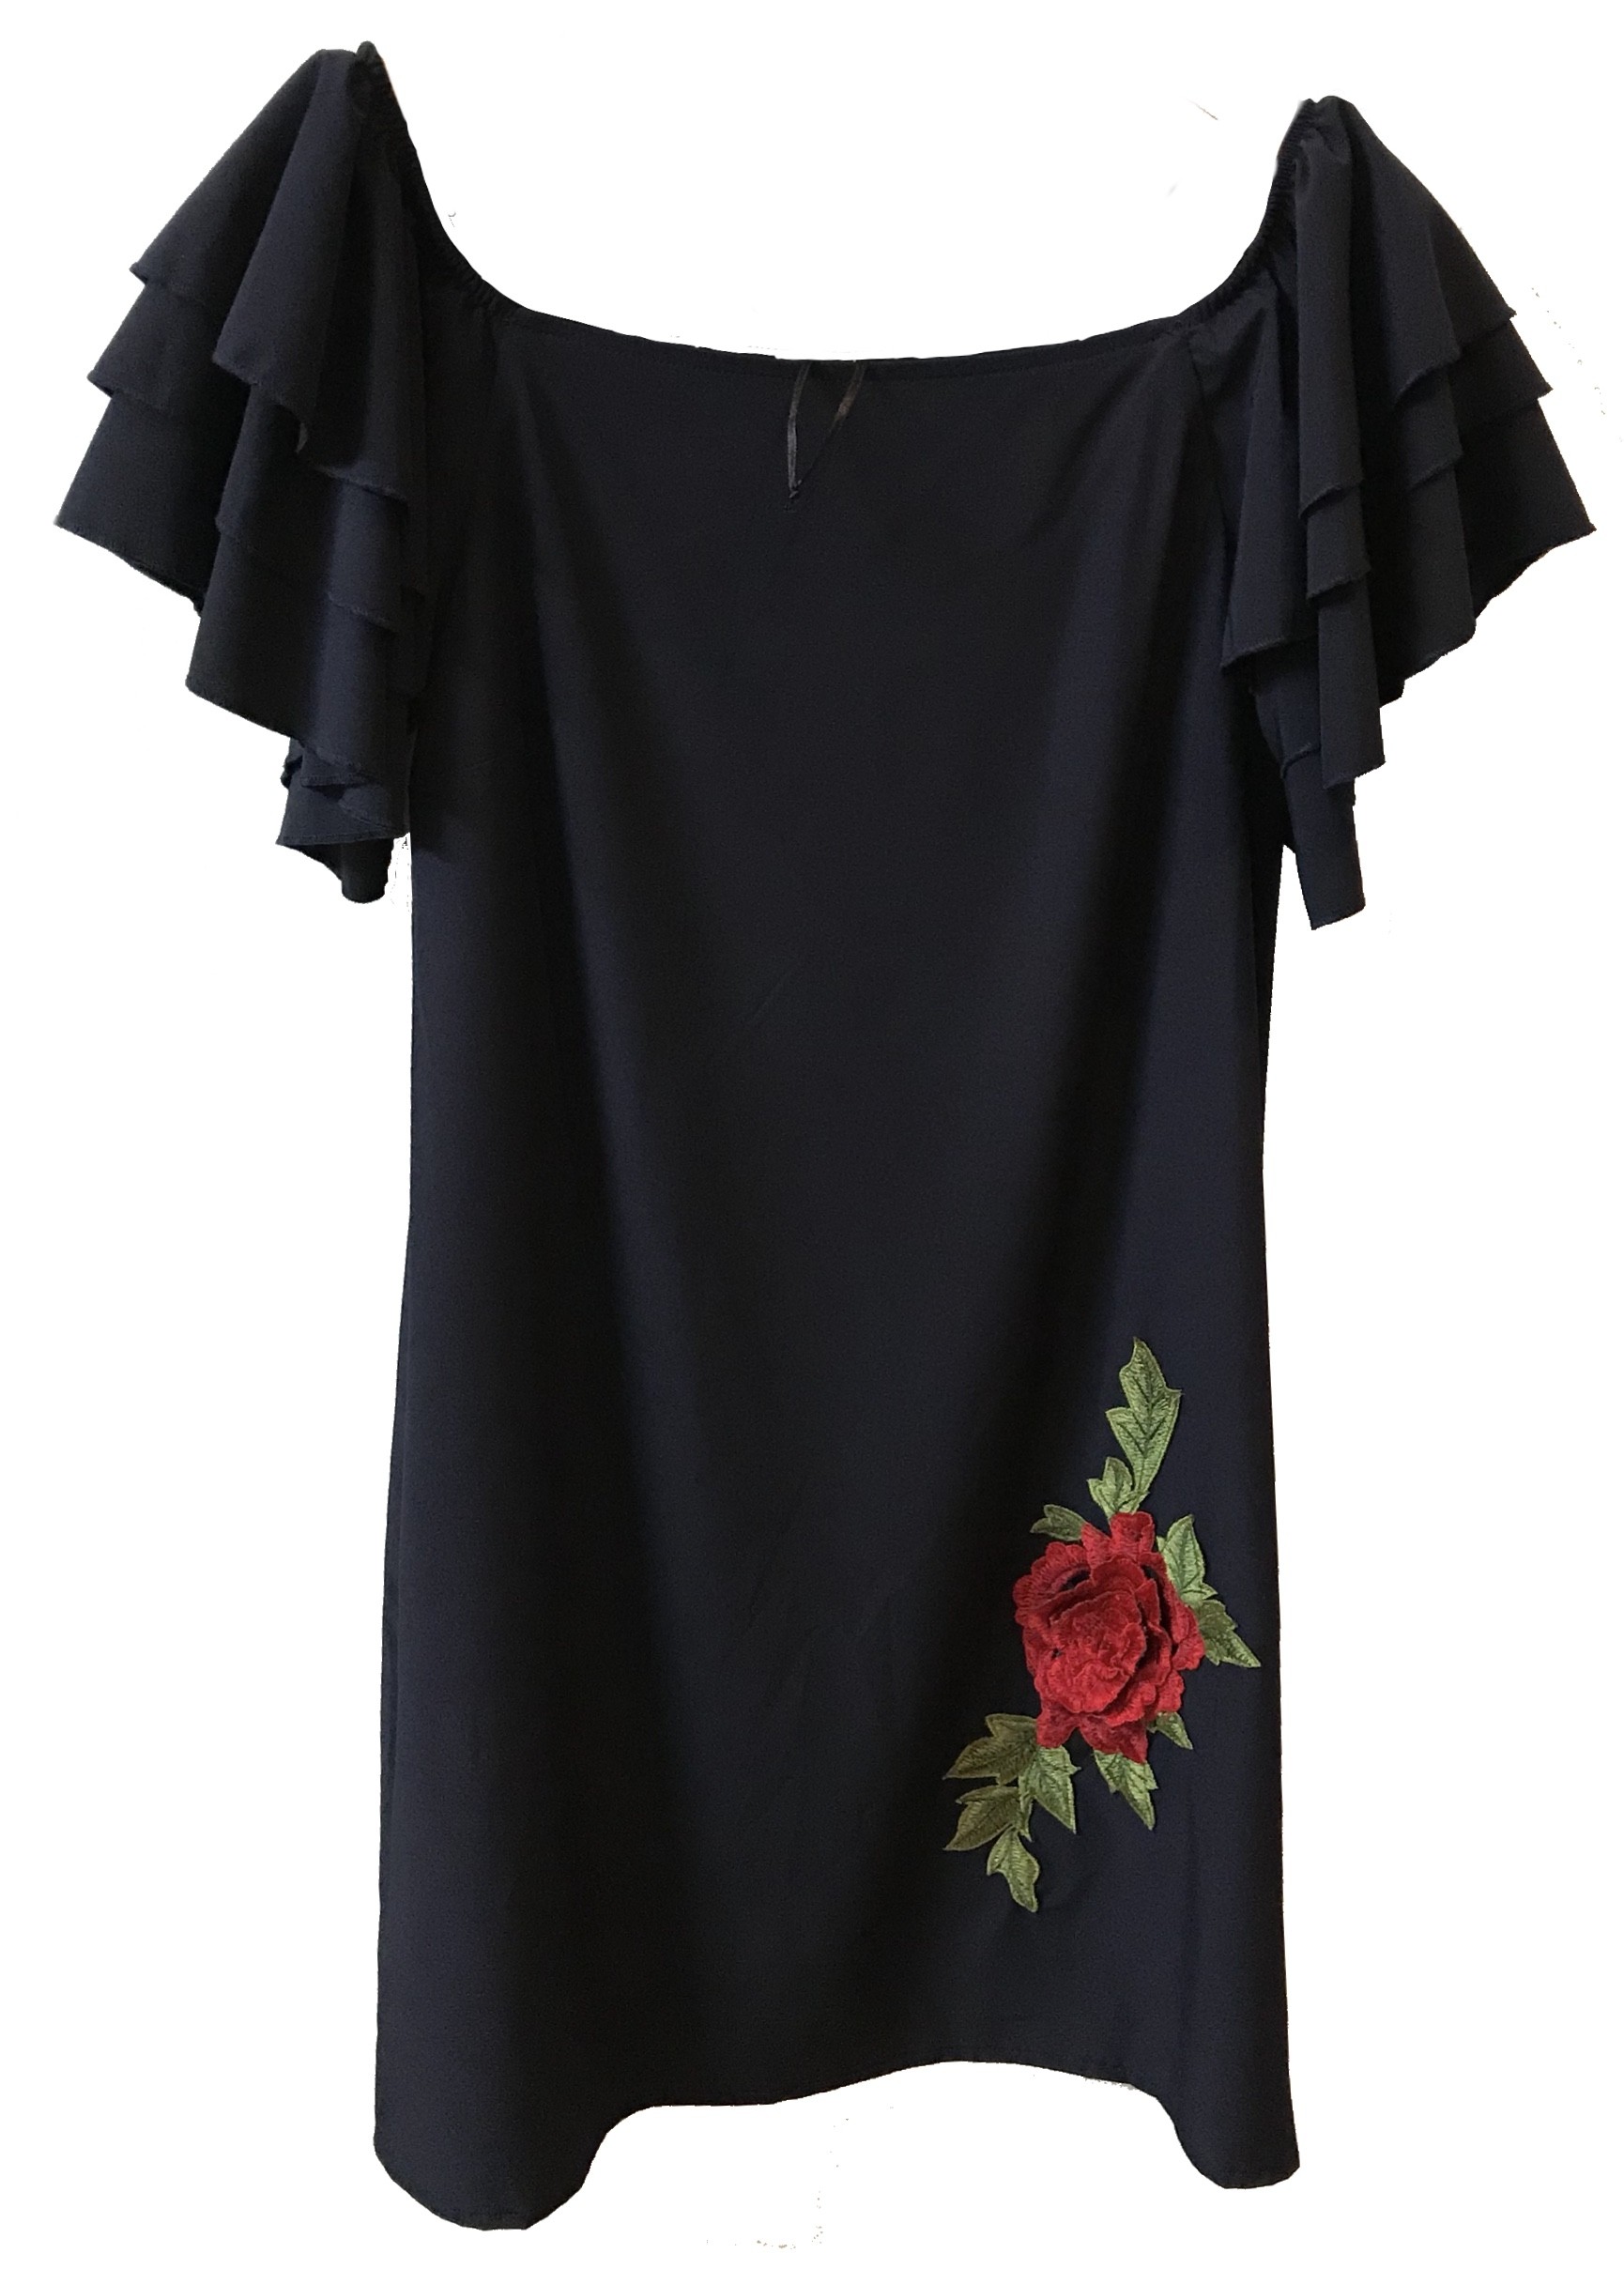 Women’s Embroidery red rose Flower sew on patch Dress navy blue